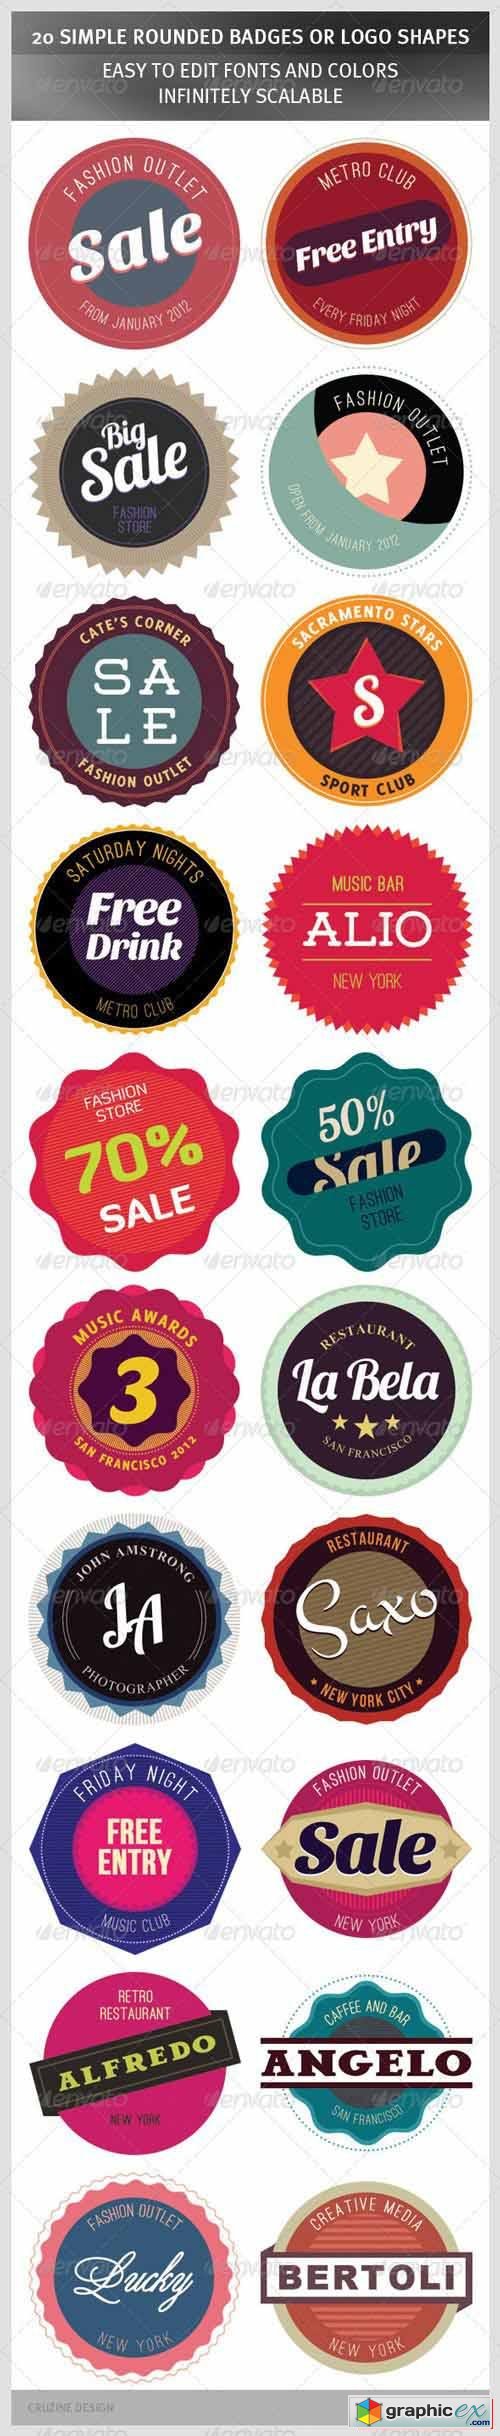 20 Simple Rounded Badges or Logo Shapes 